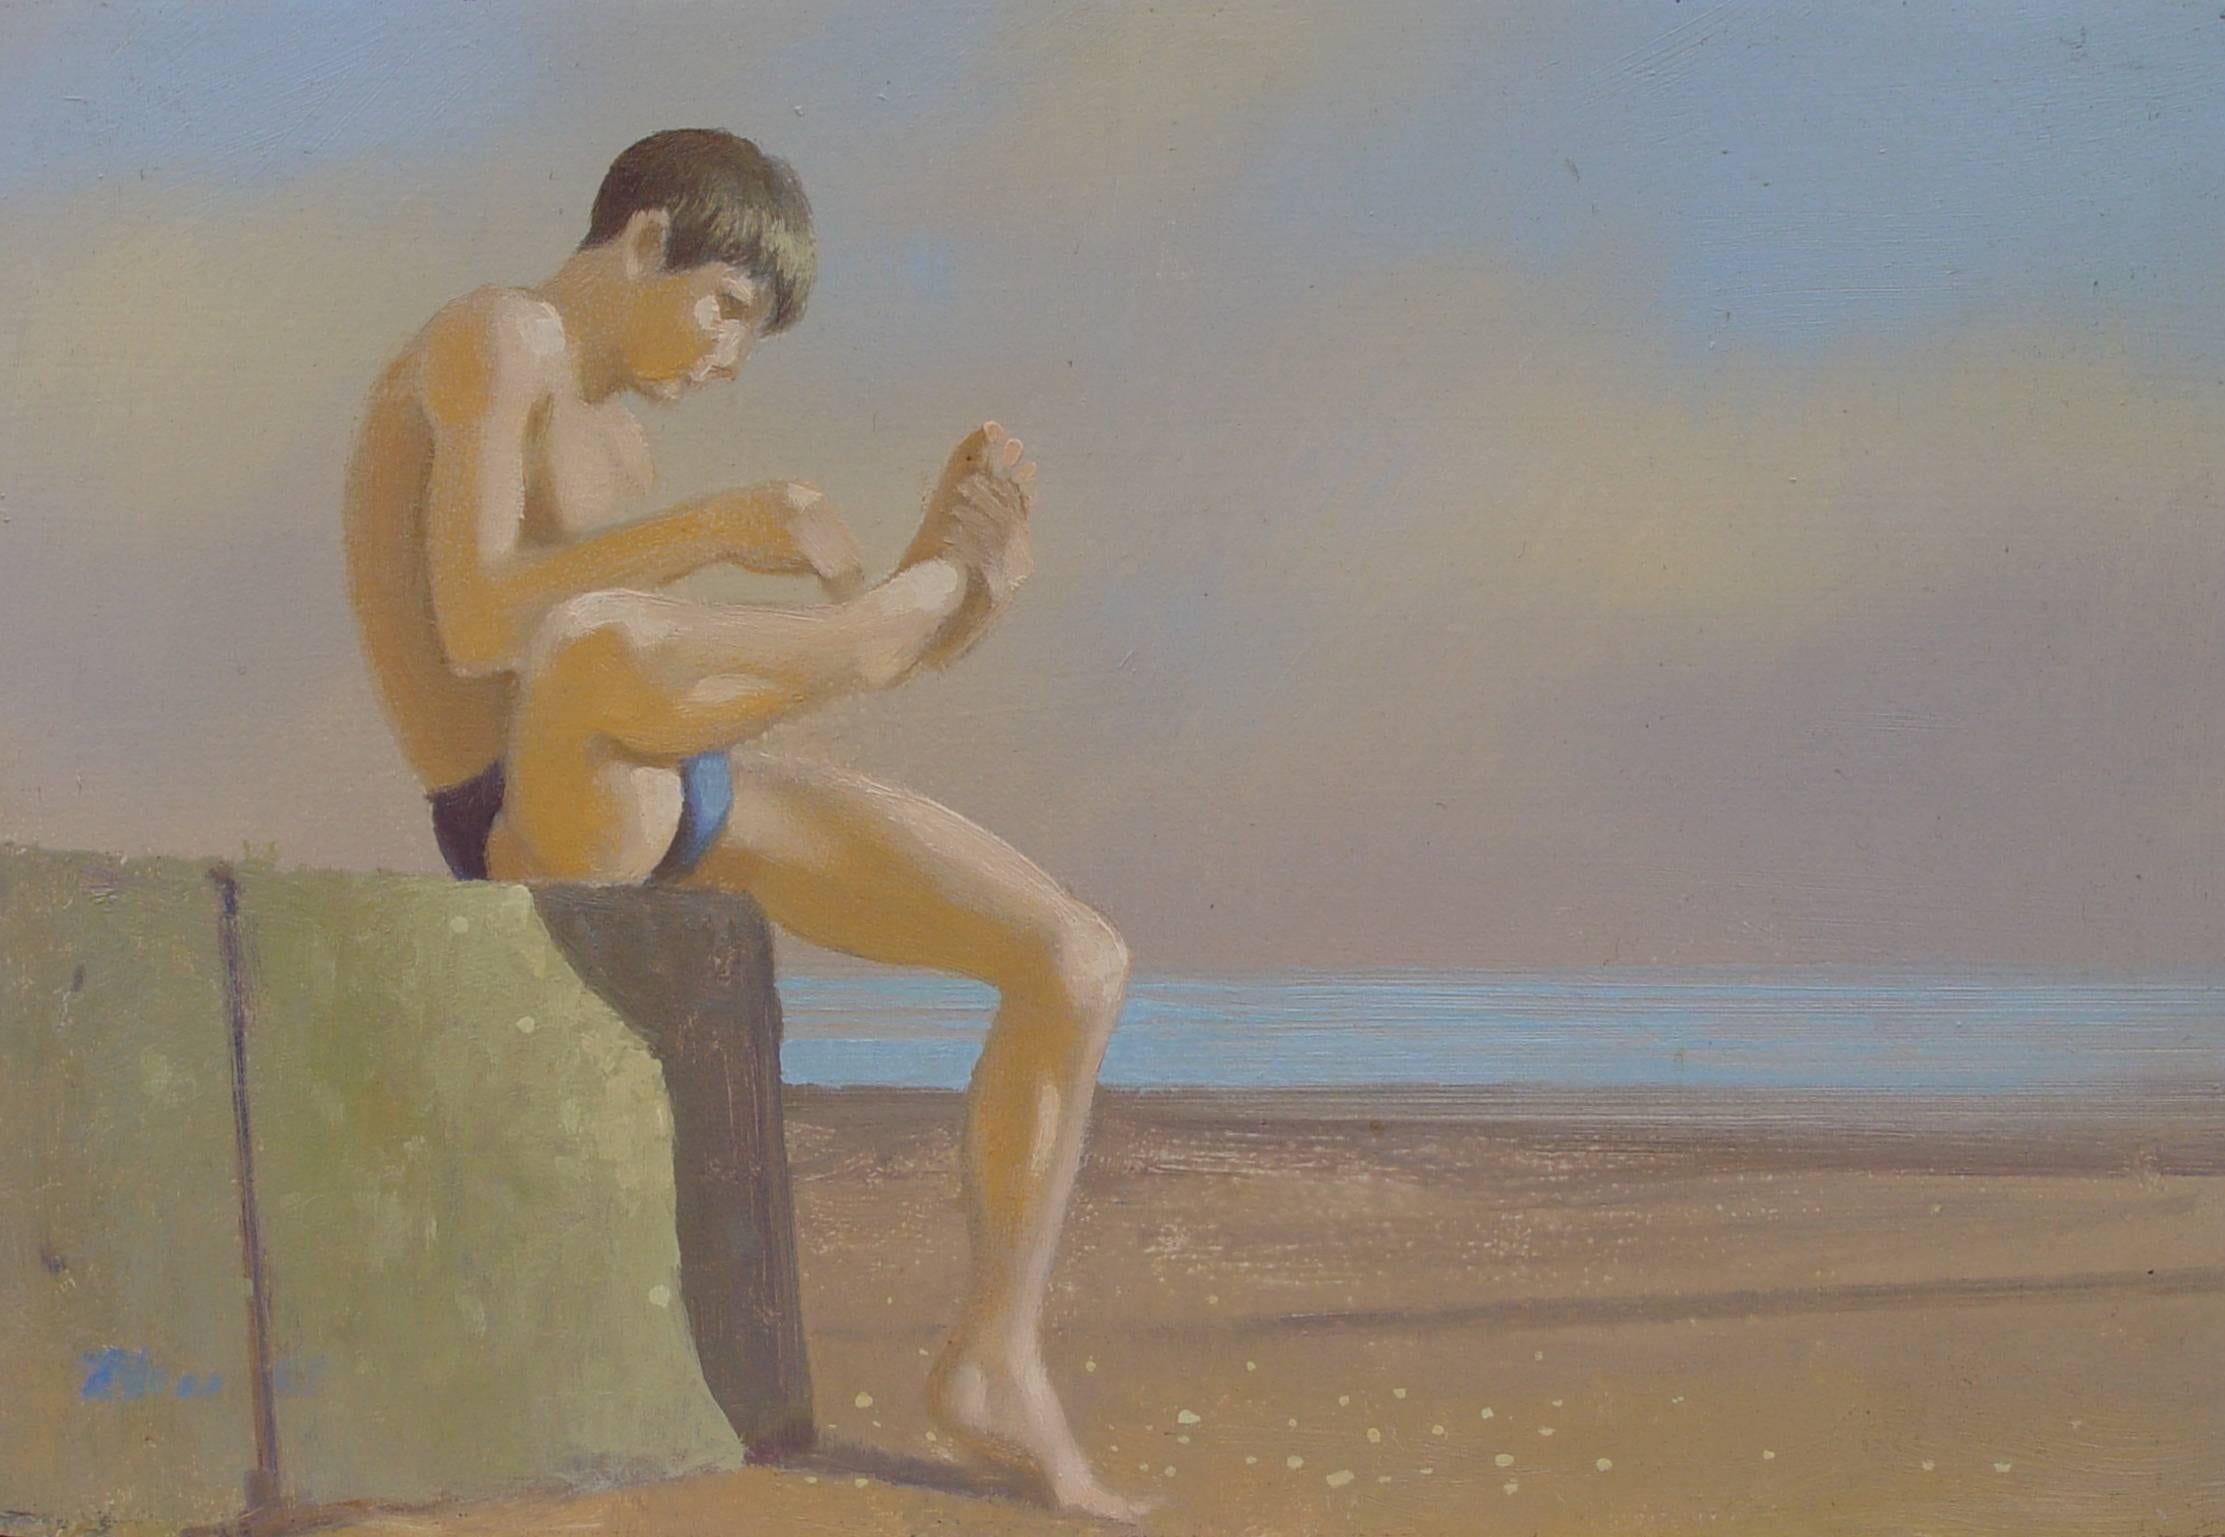 Boy on a Seawall - Painting by Robert Bliss